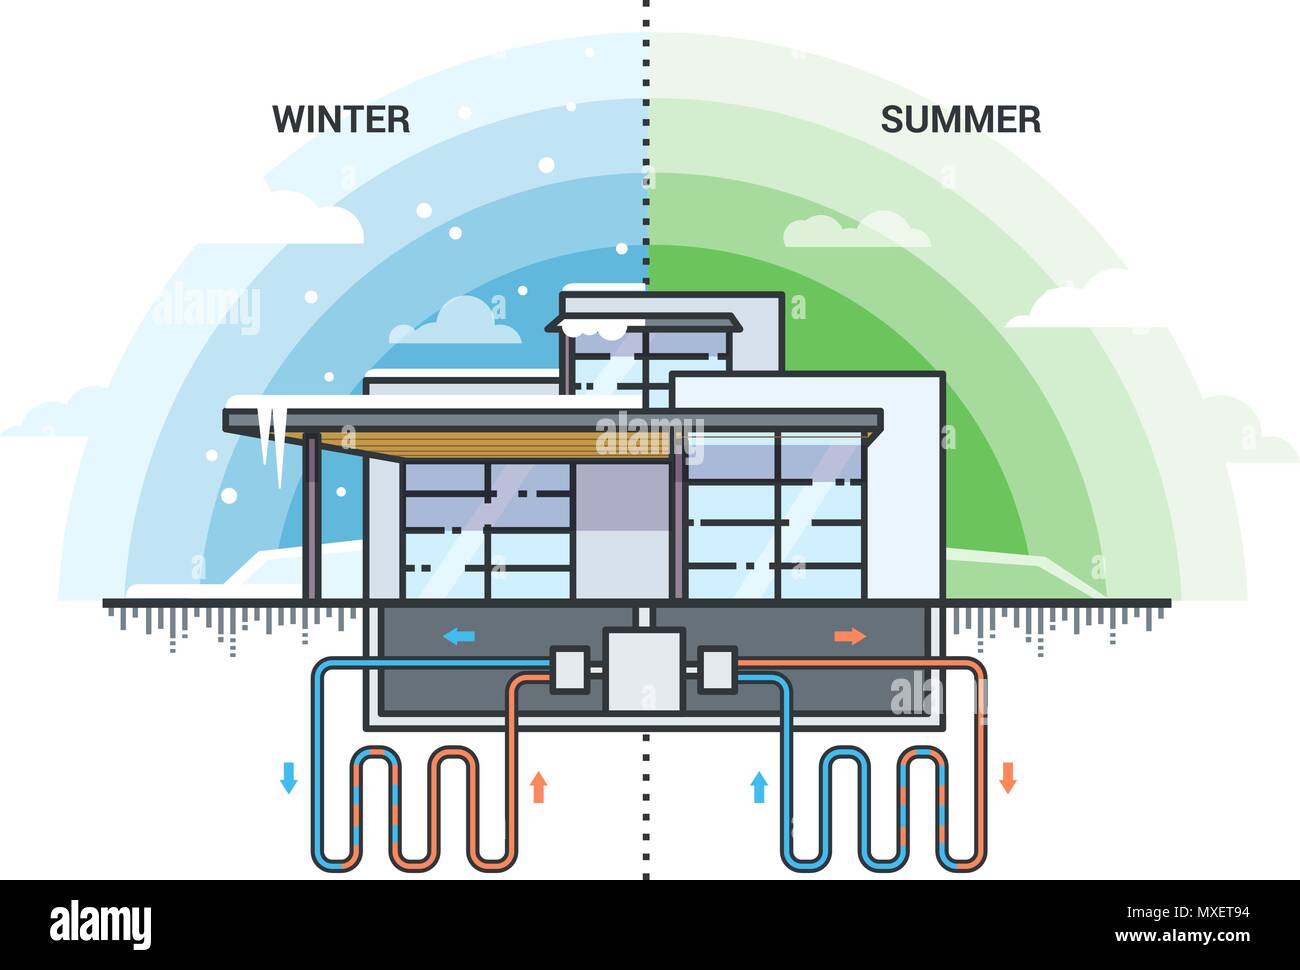 GeotherVector illustration of modern house with system of using of geothermal energy for heating. Eco friendly geothermal solution for summer and wint Stock Vector